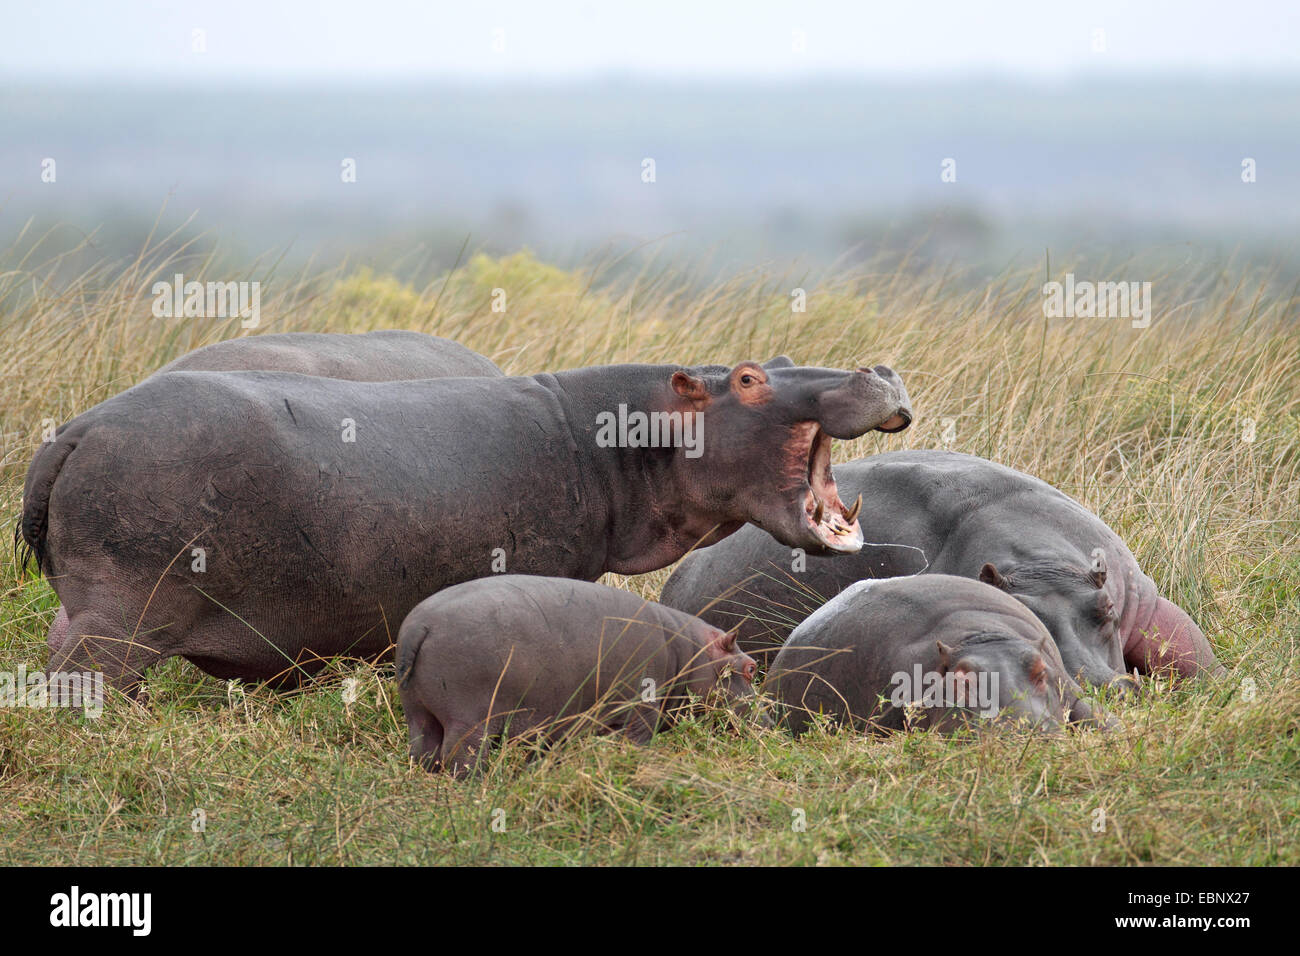 hippopotamus, hippo, Common hippopotamus (Hippopotamus amphibius), adult animal with open mouth guarding the infants, South Africa, St. Lucia Stock Photo